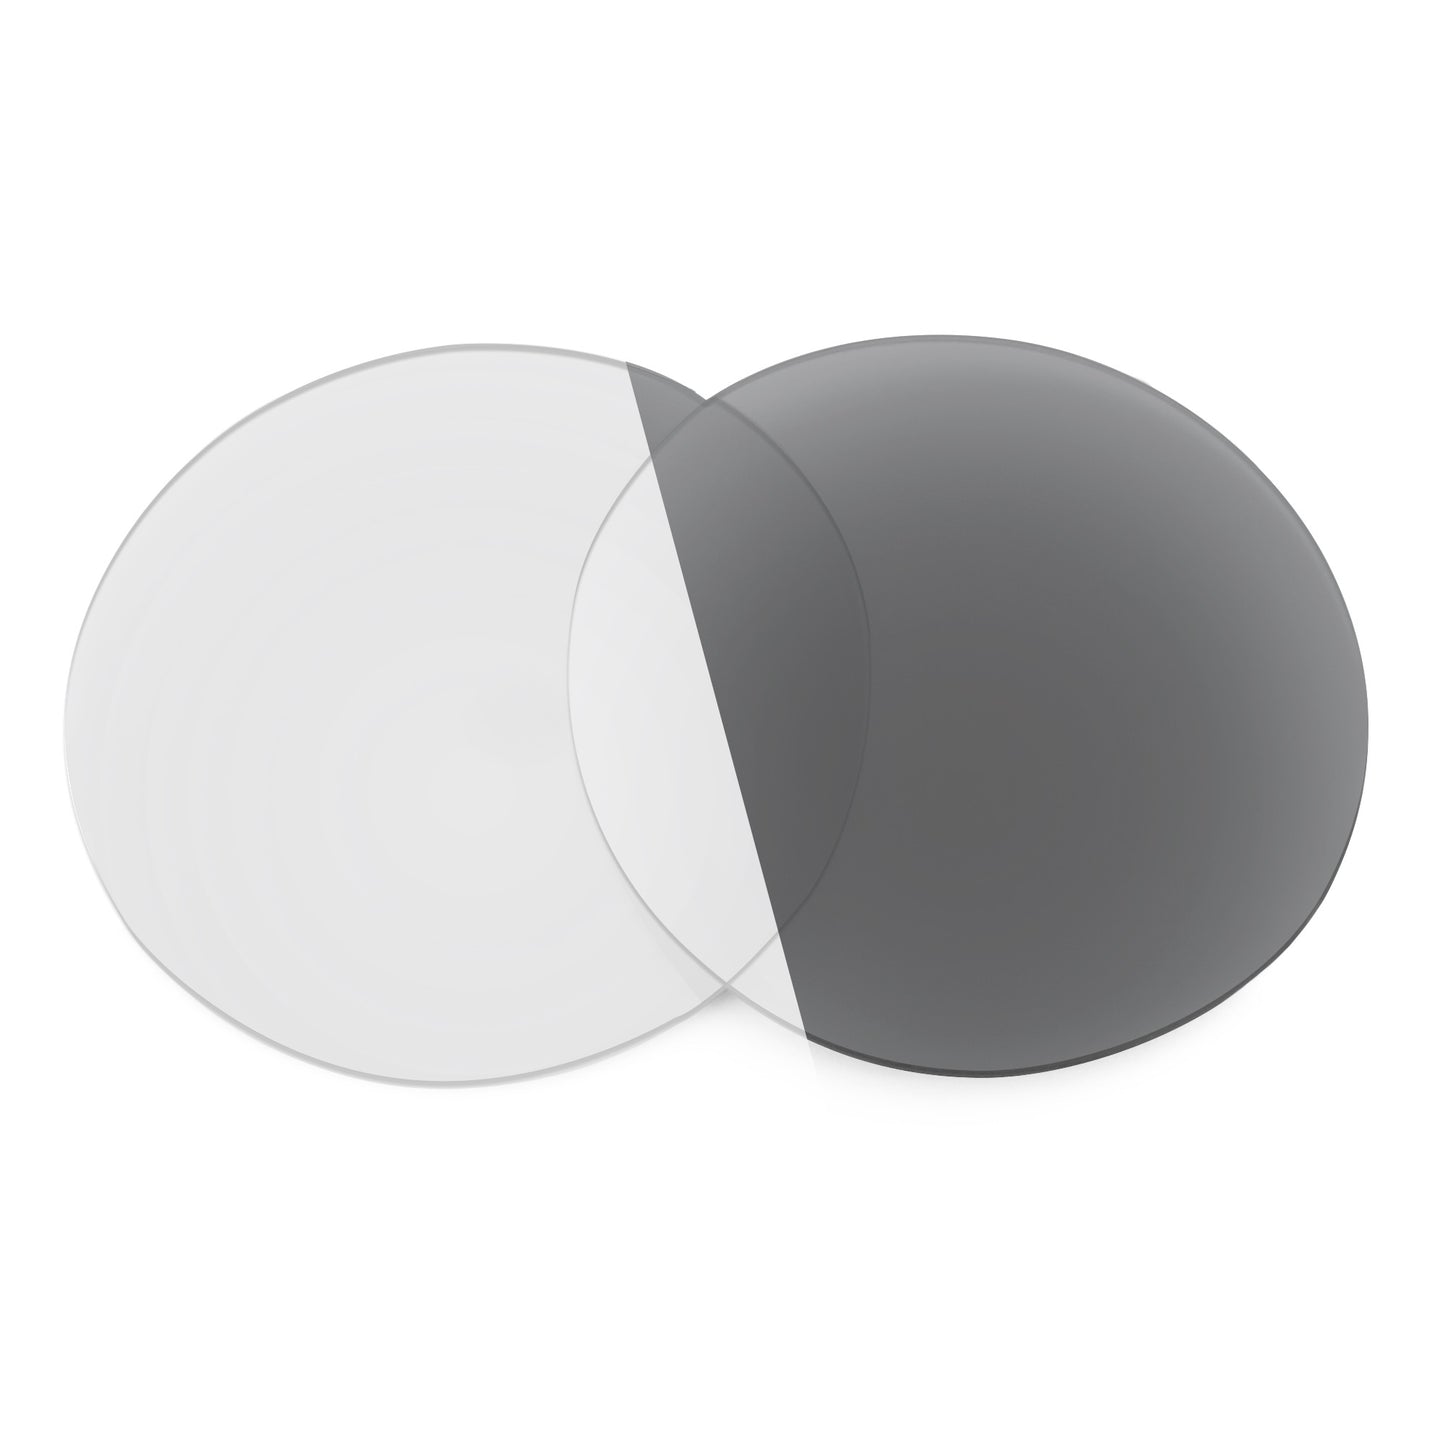 Revant replacement lenses for Ray-Ban RB3536 55mm Non-Polarized Adapt Gray Photochromic